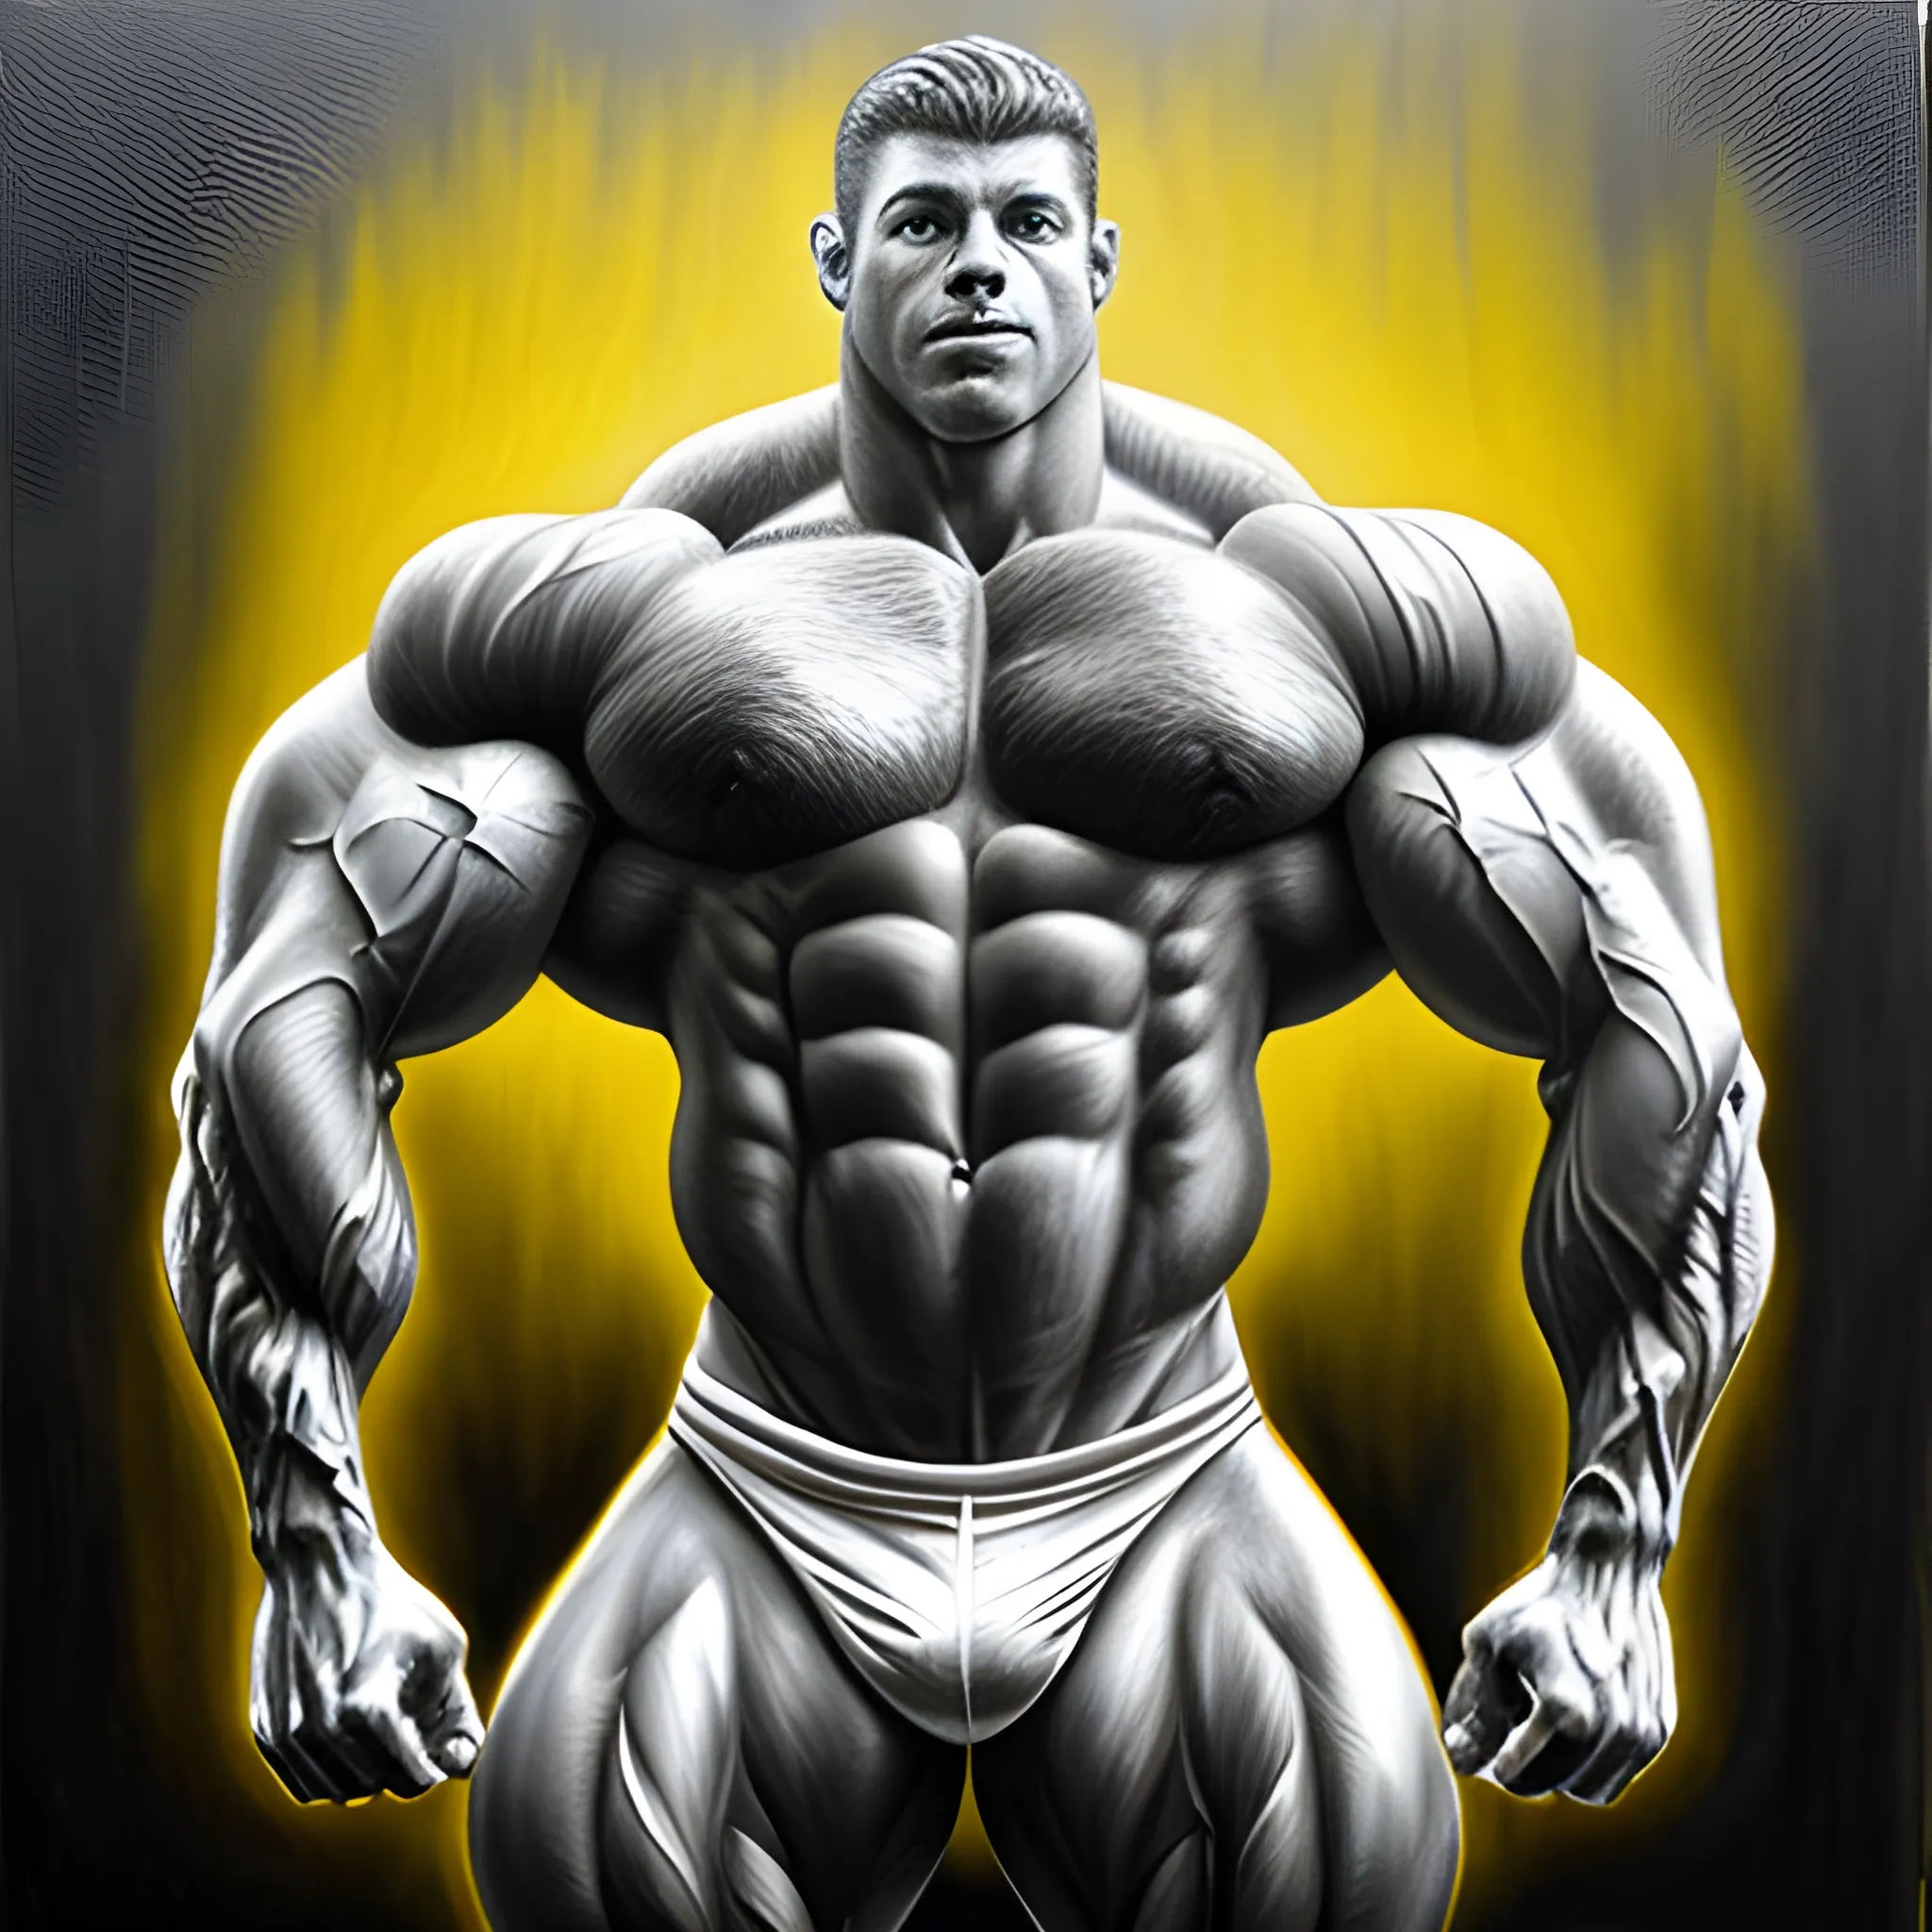 , Oil Painting, Trippy
MUSCLE BODYBUILDER MORPHED, 3D, Pencil Sketch